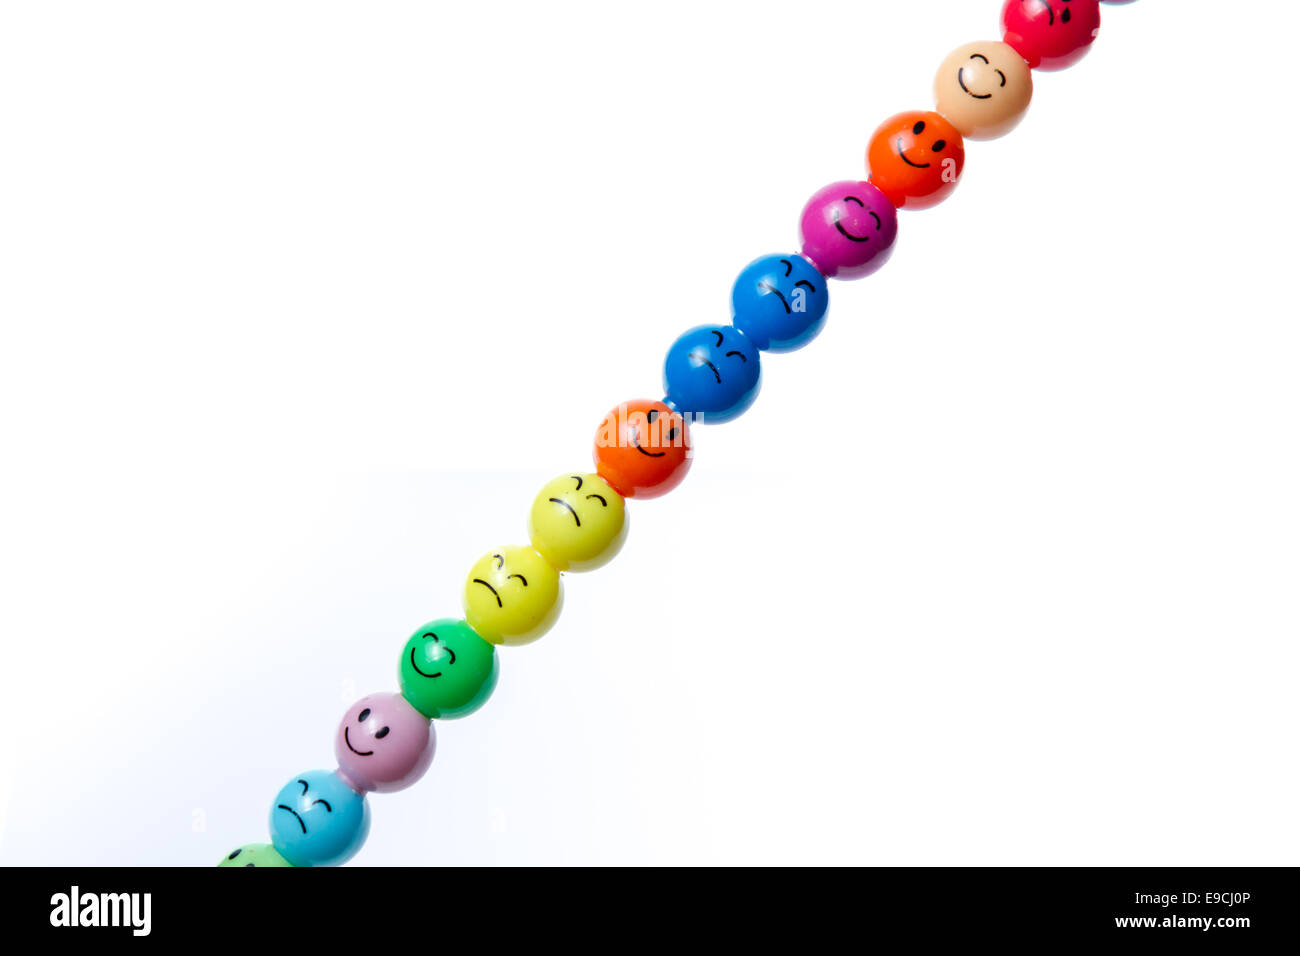 Smiley faces with various expressions on a pen Stock Photo